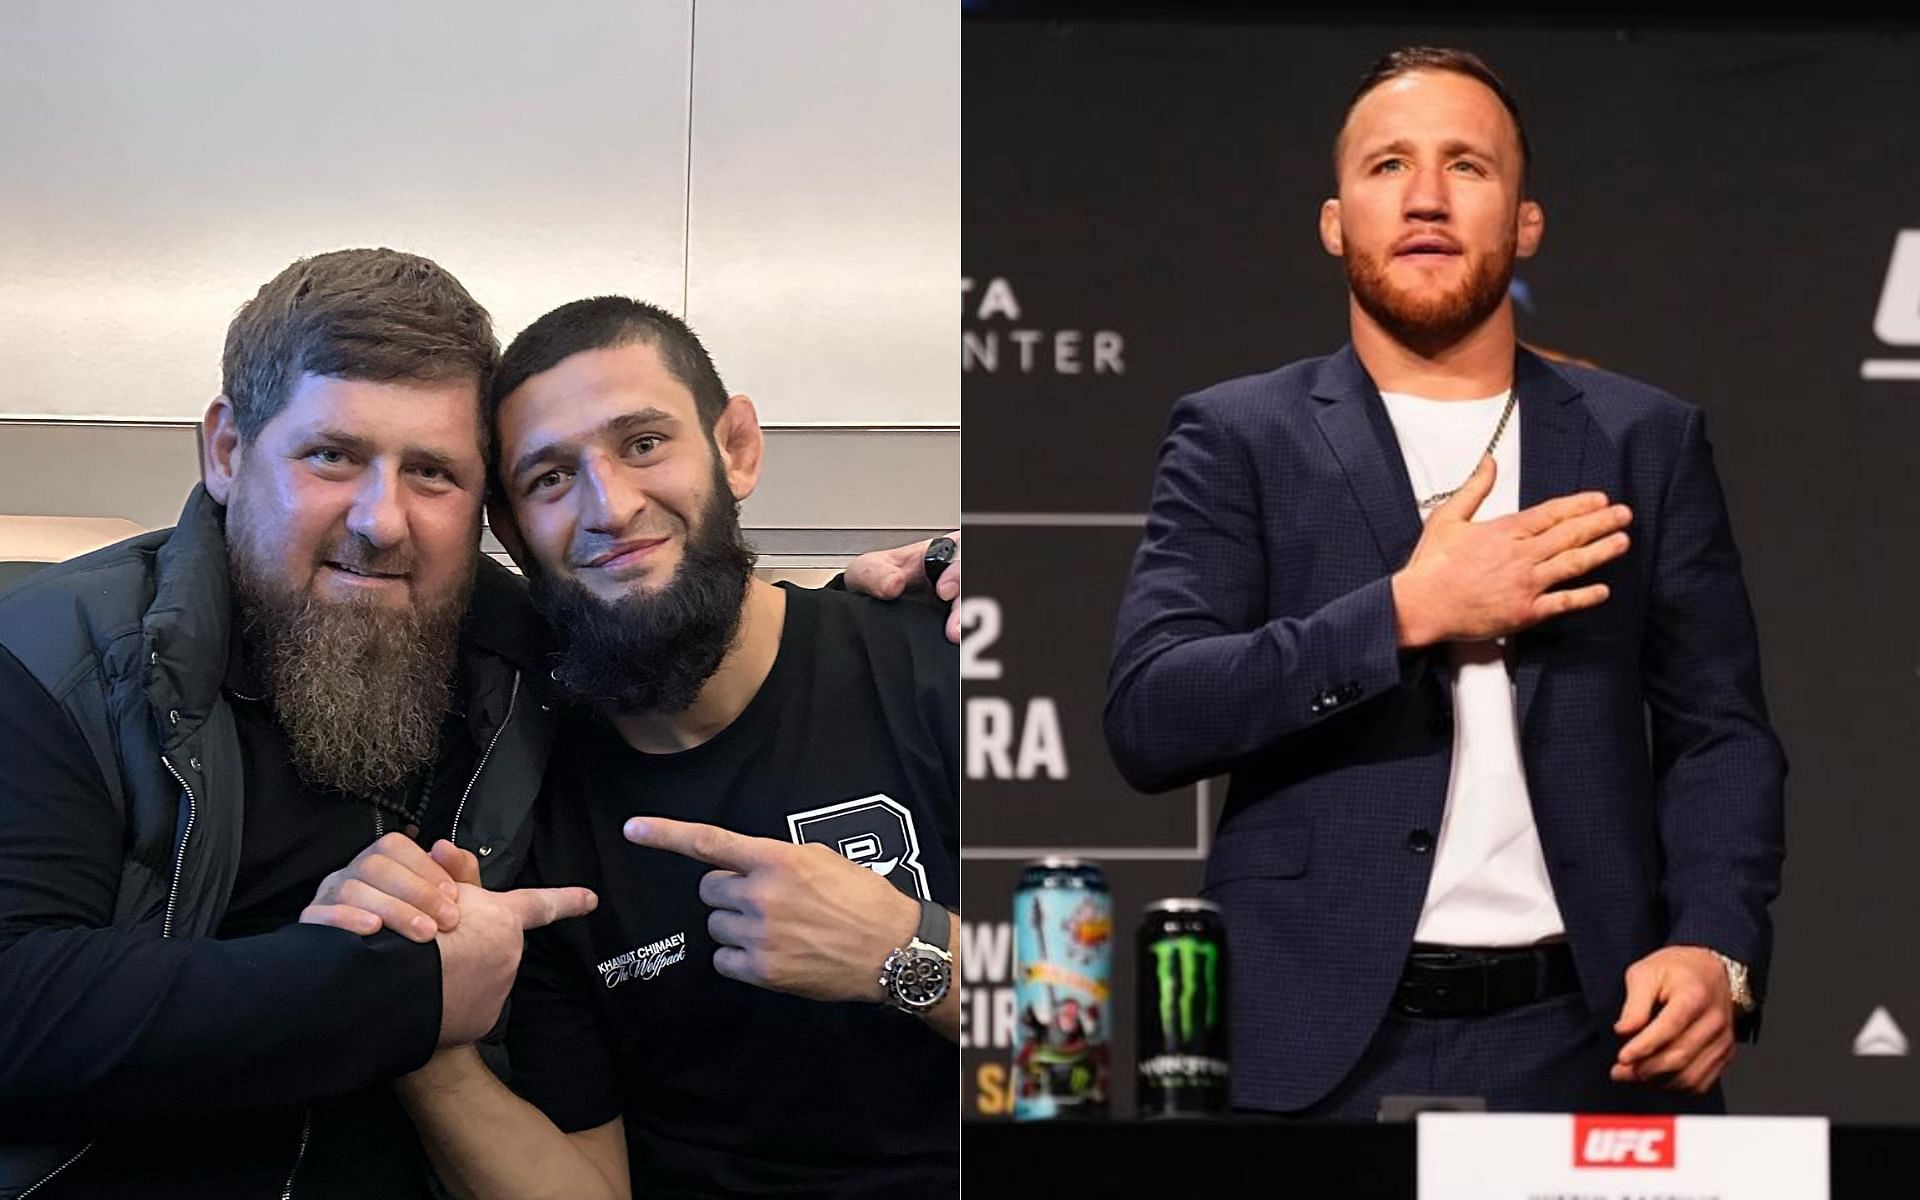 Khamzat Chimaev has come under fire for meeting Chechen warlord Ramzan Kadyrov, a criticism also levied at Justin Gaethje [Image Credit: @khamzat_chimaev and @justin_gaethje on Instagram]